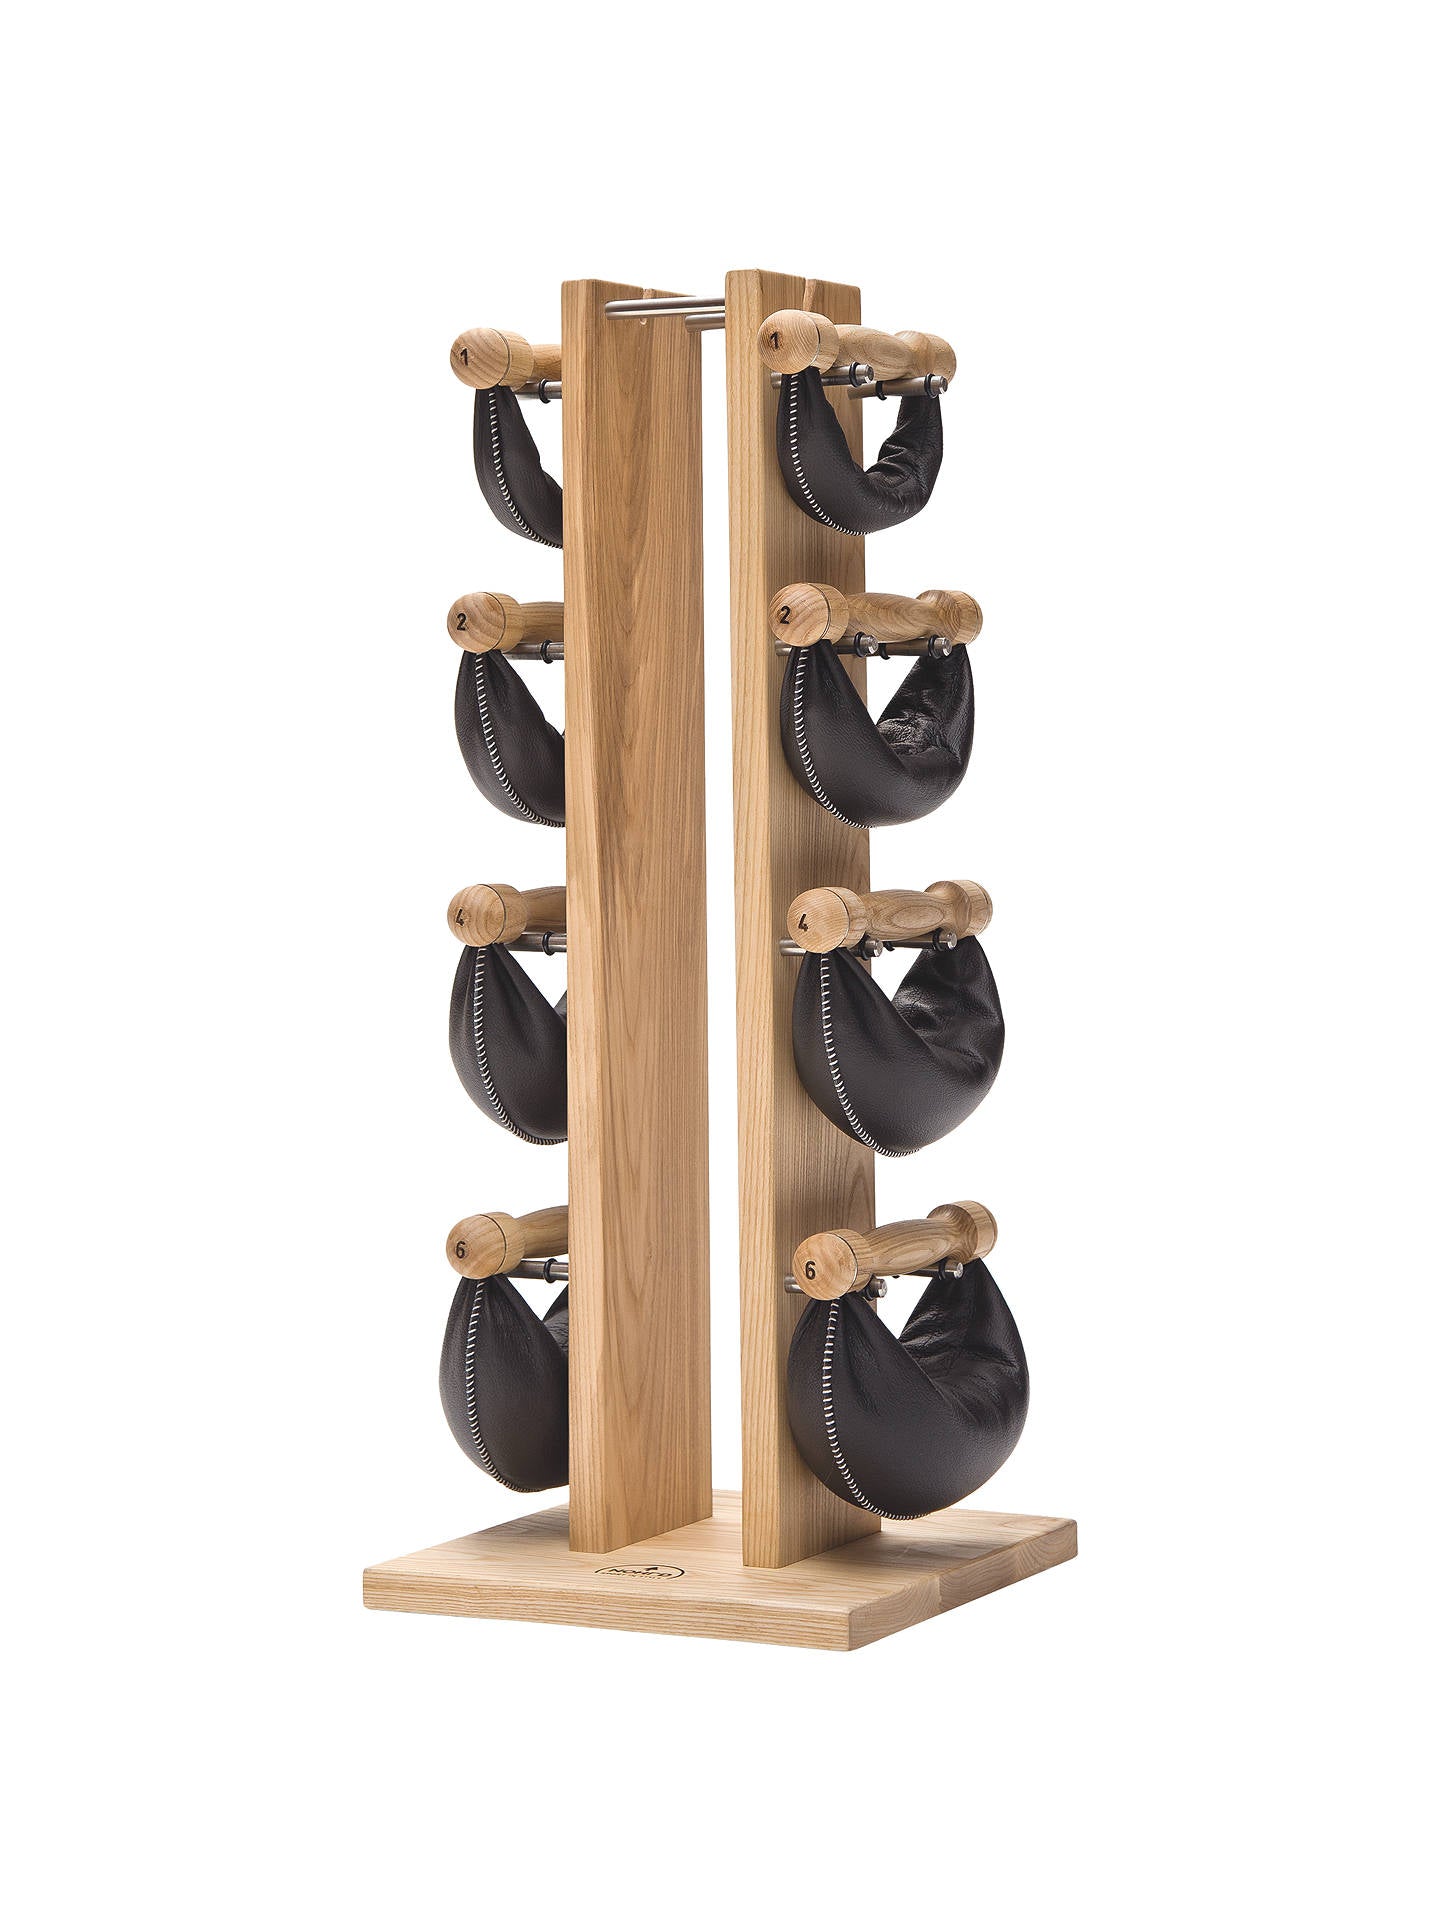 NOHrD Swing Bell Tower Sets